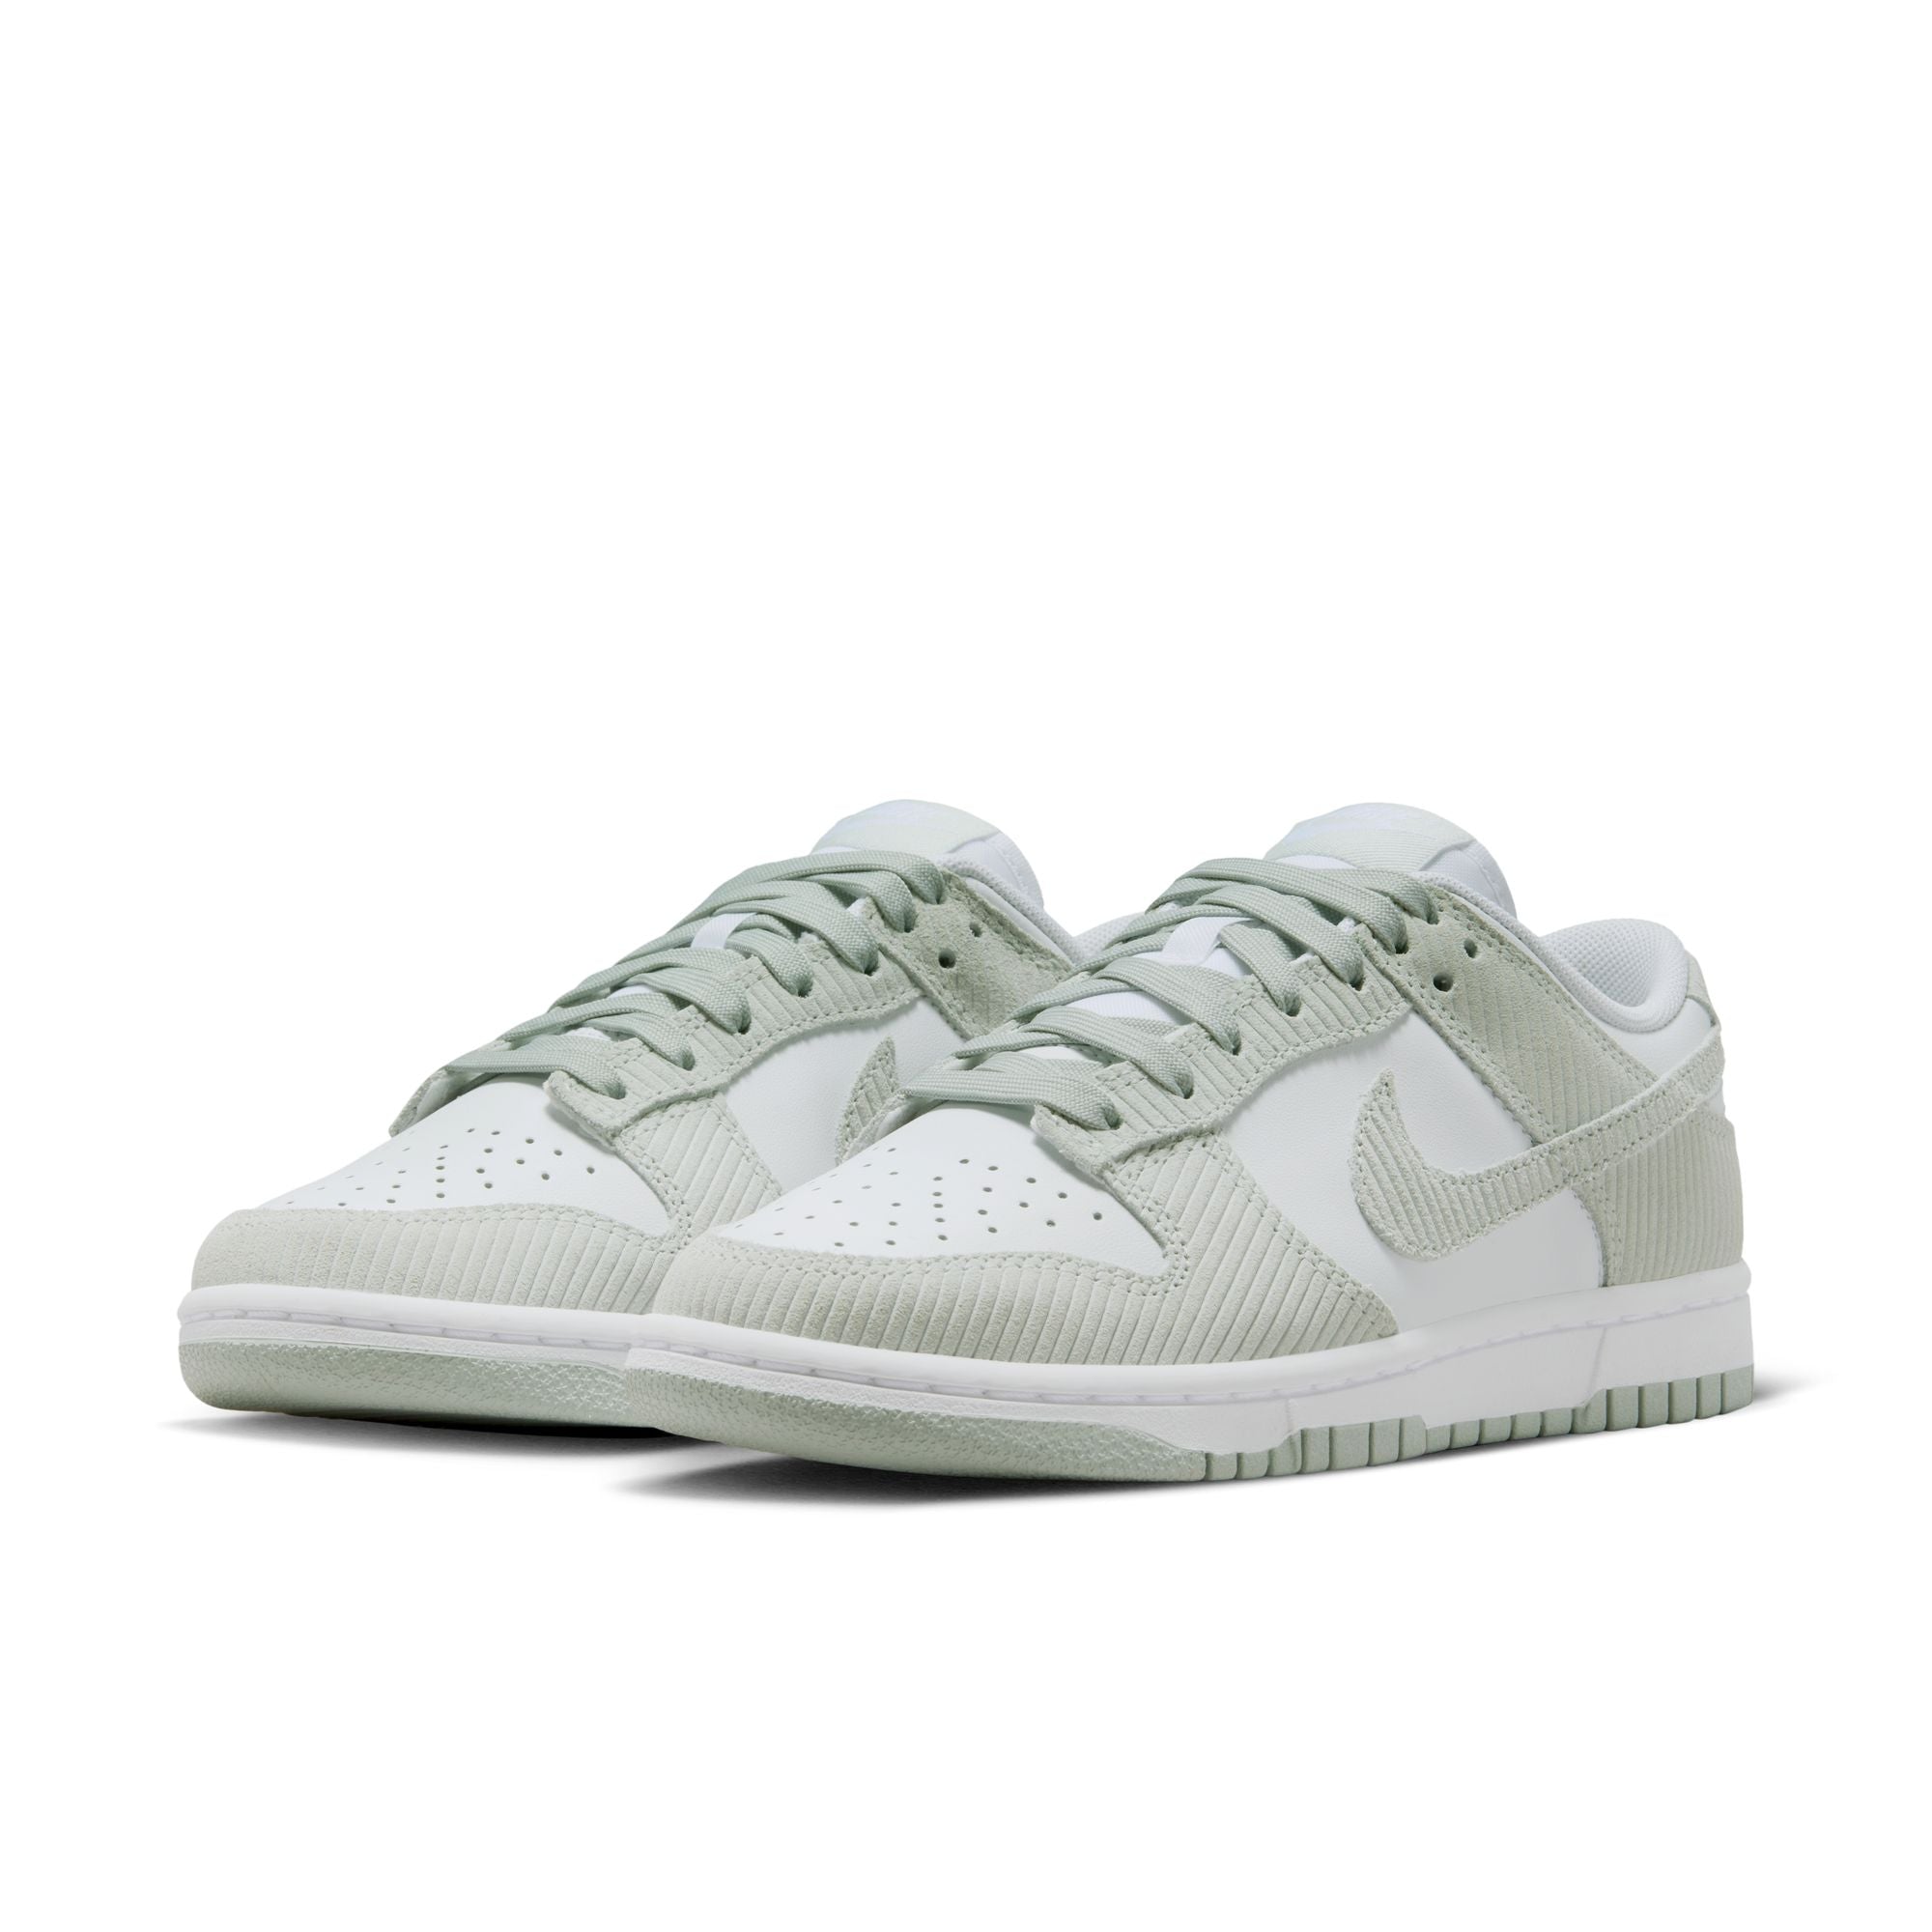 WMNS Nike Dunk Low